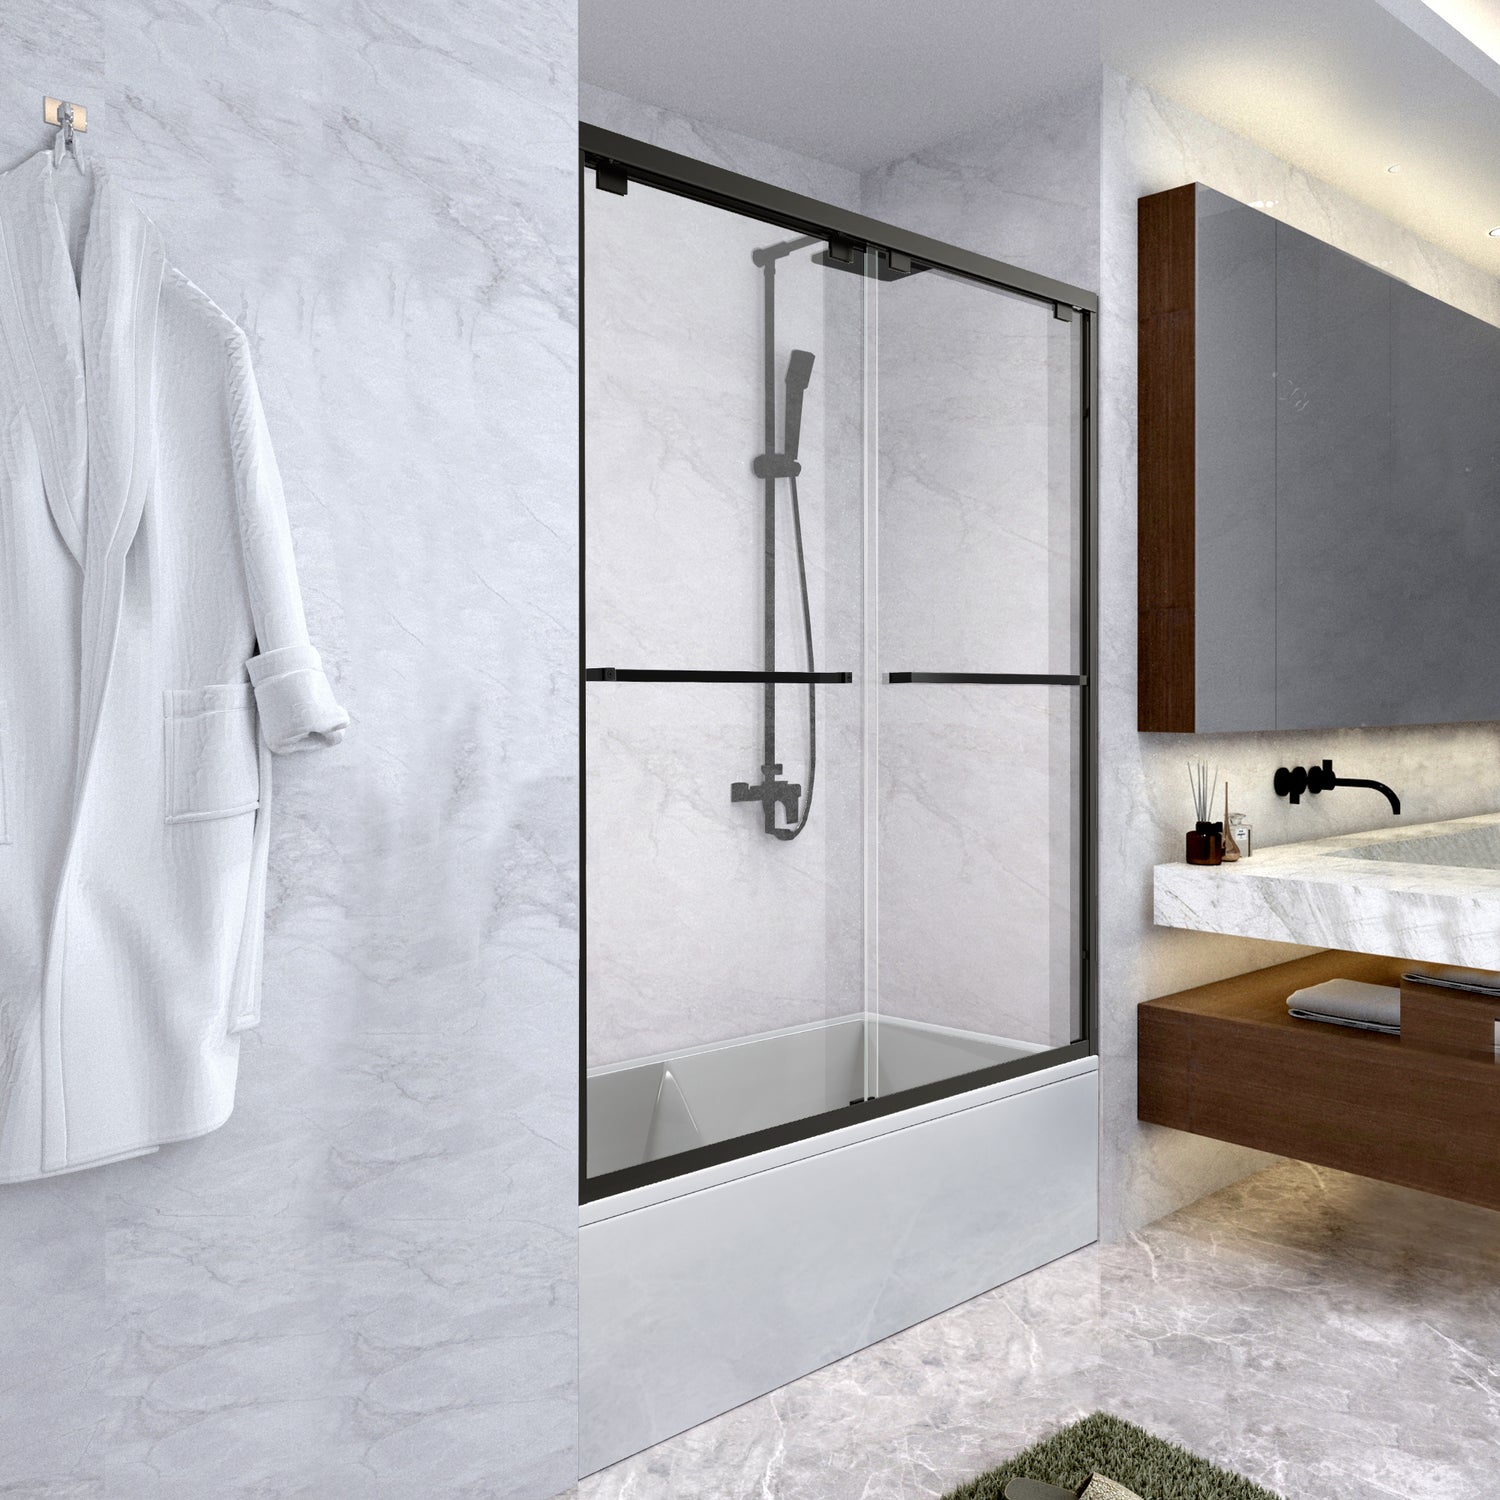 3 Tips to Get an Ideal Bathroom